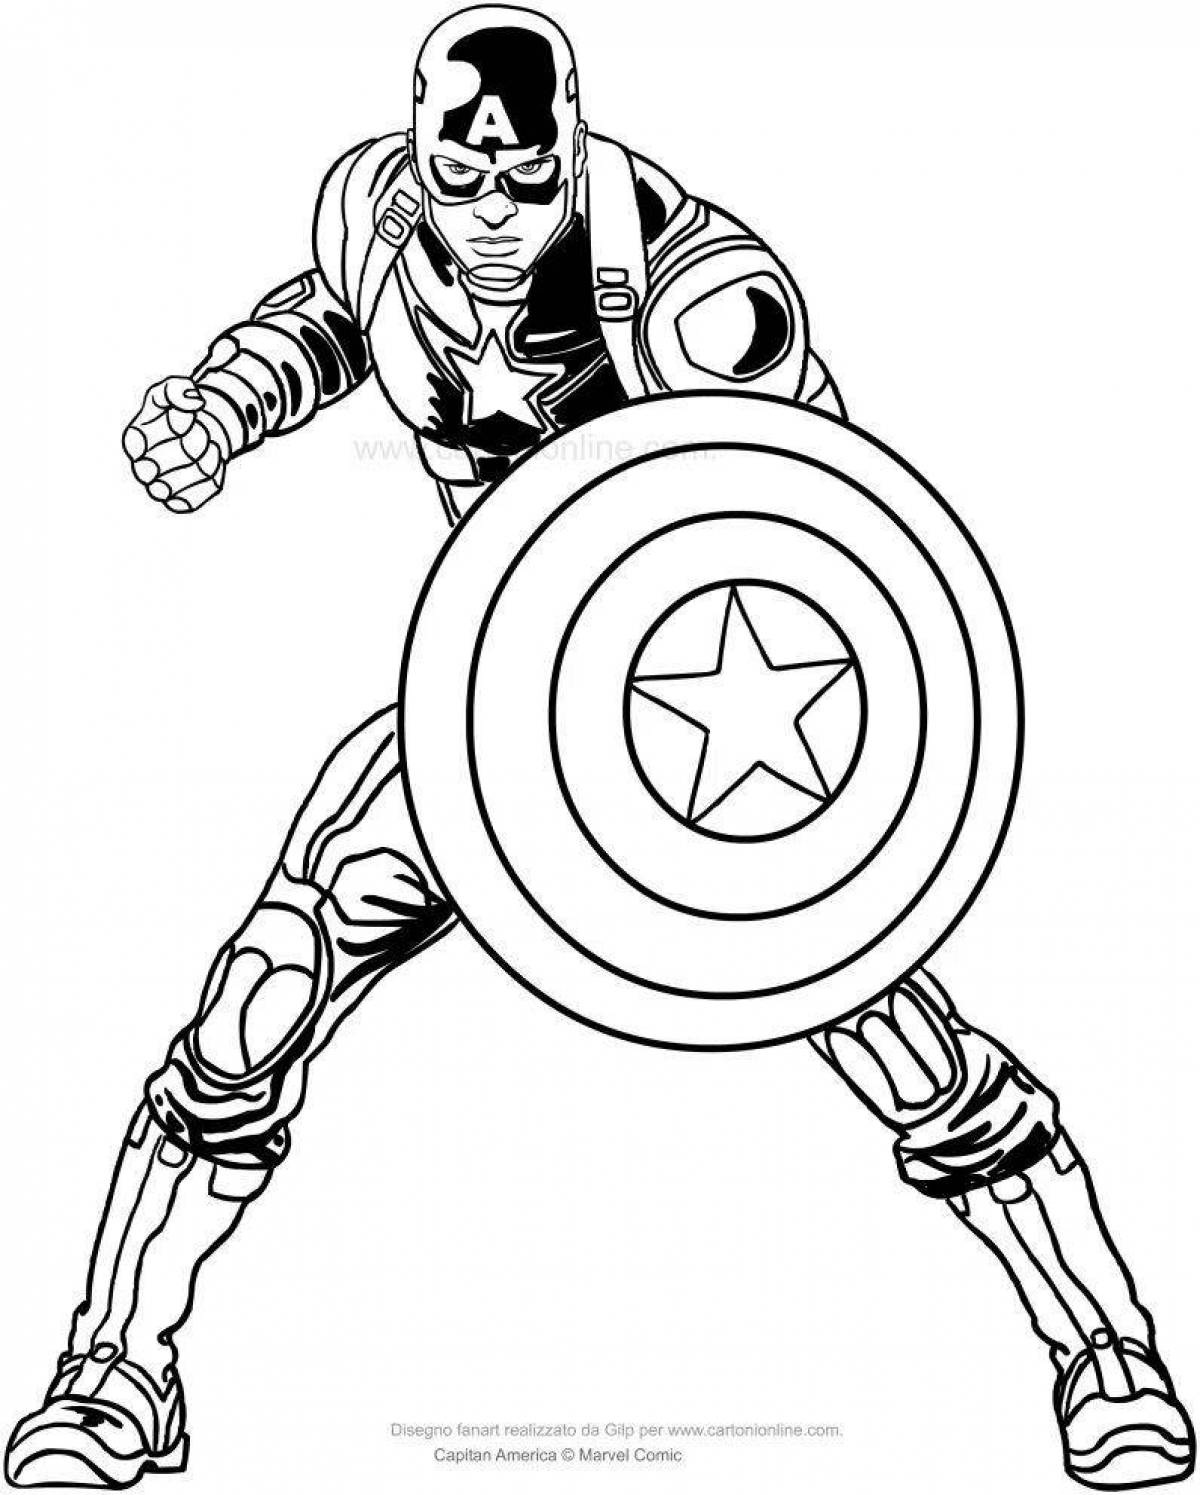 Gorgeous captain america's shield coloring page